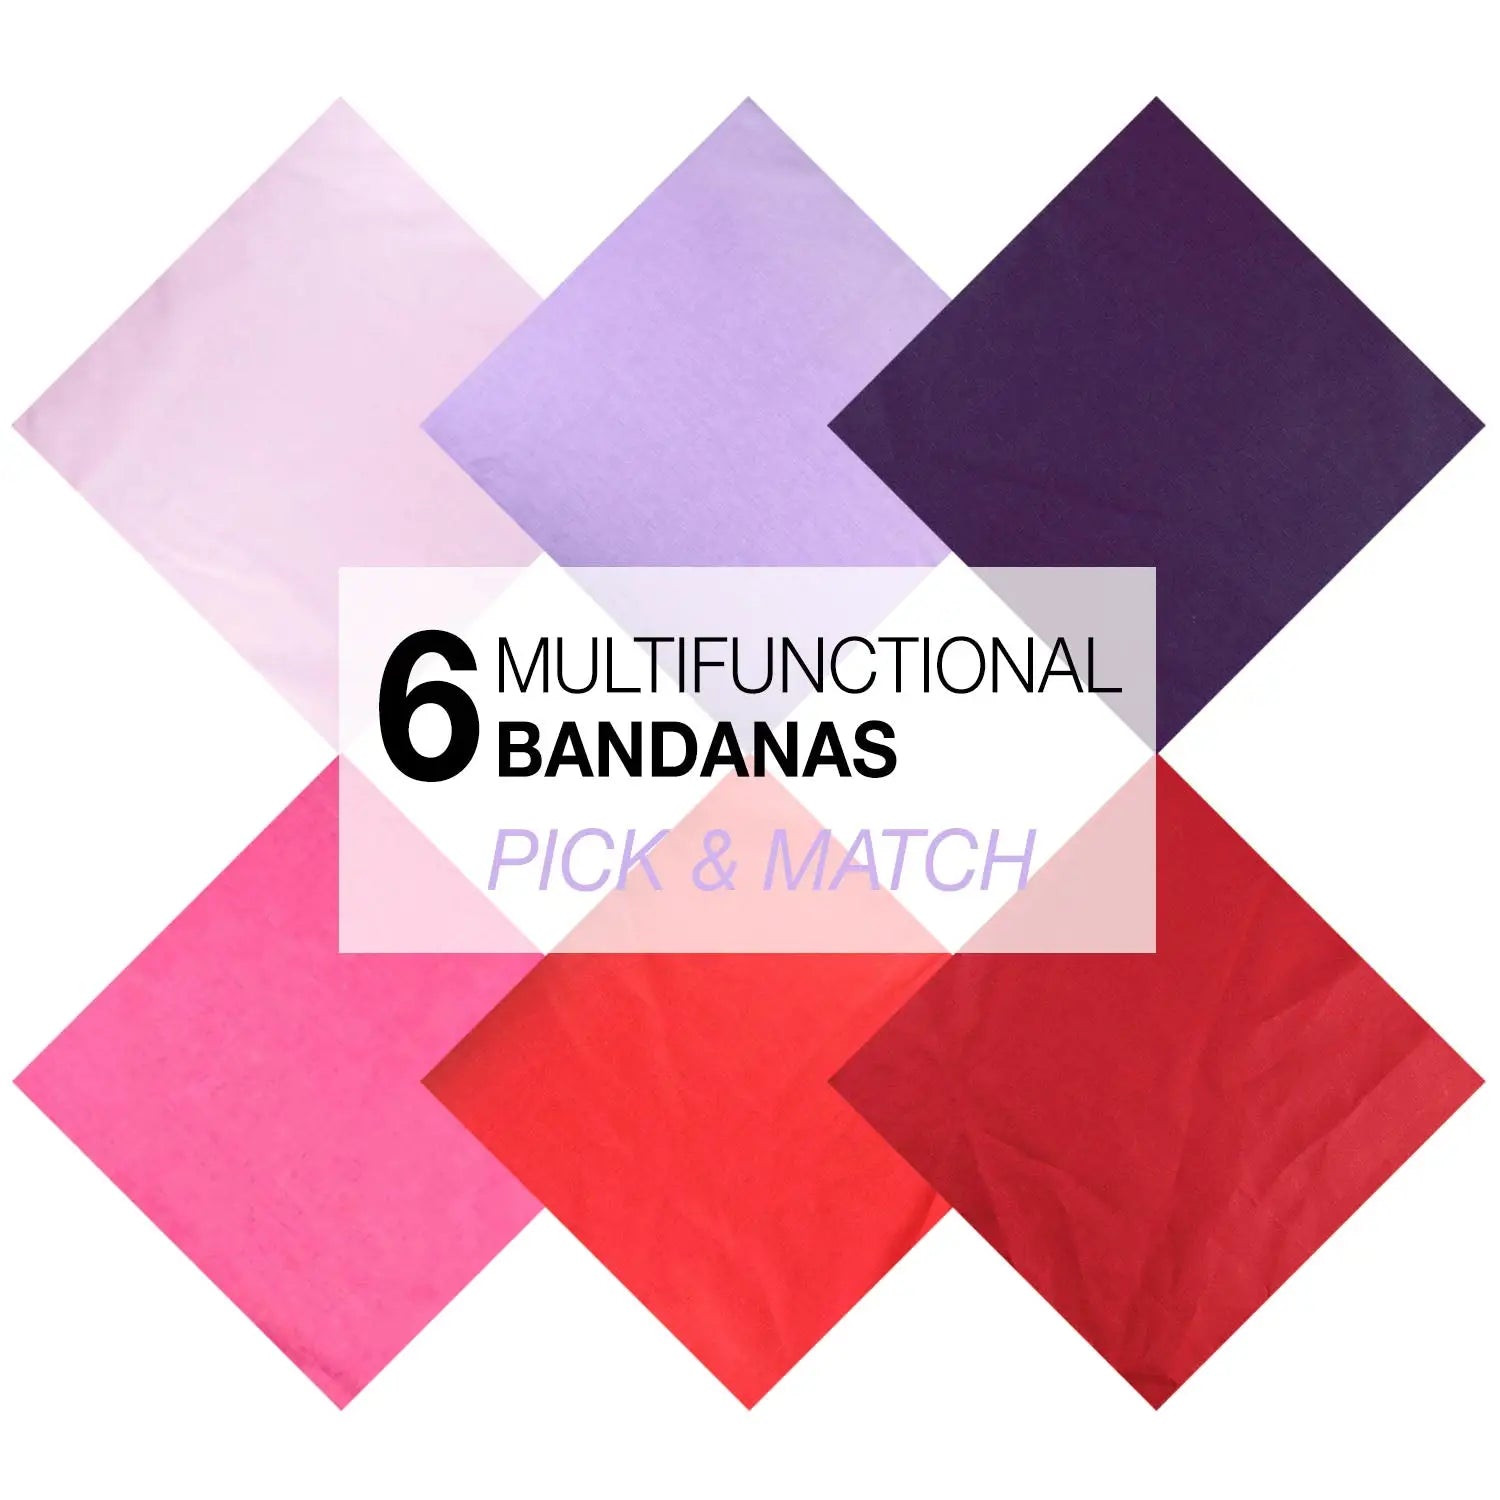 Set of 6 plain cotton bandana napkins in assorted solid colors